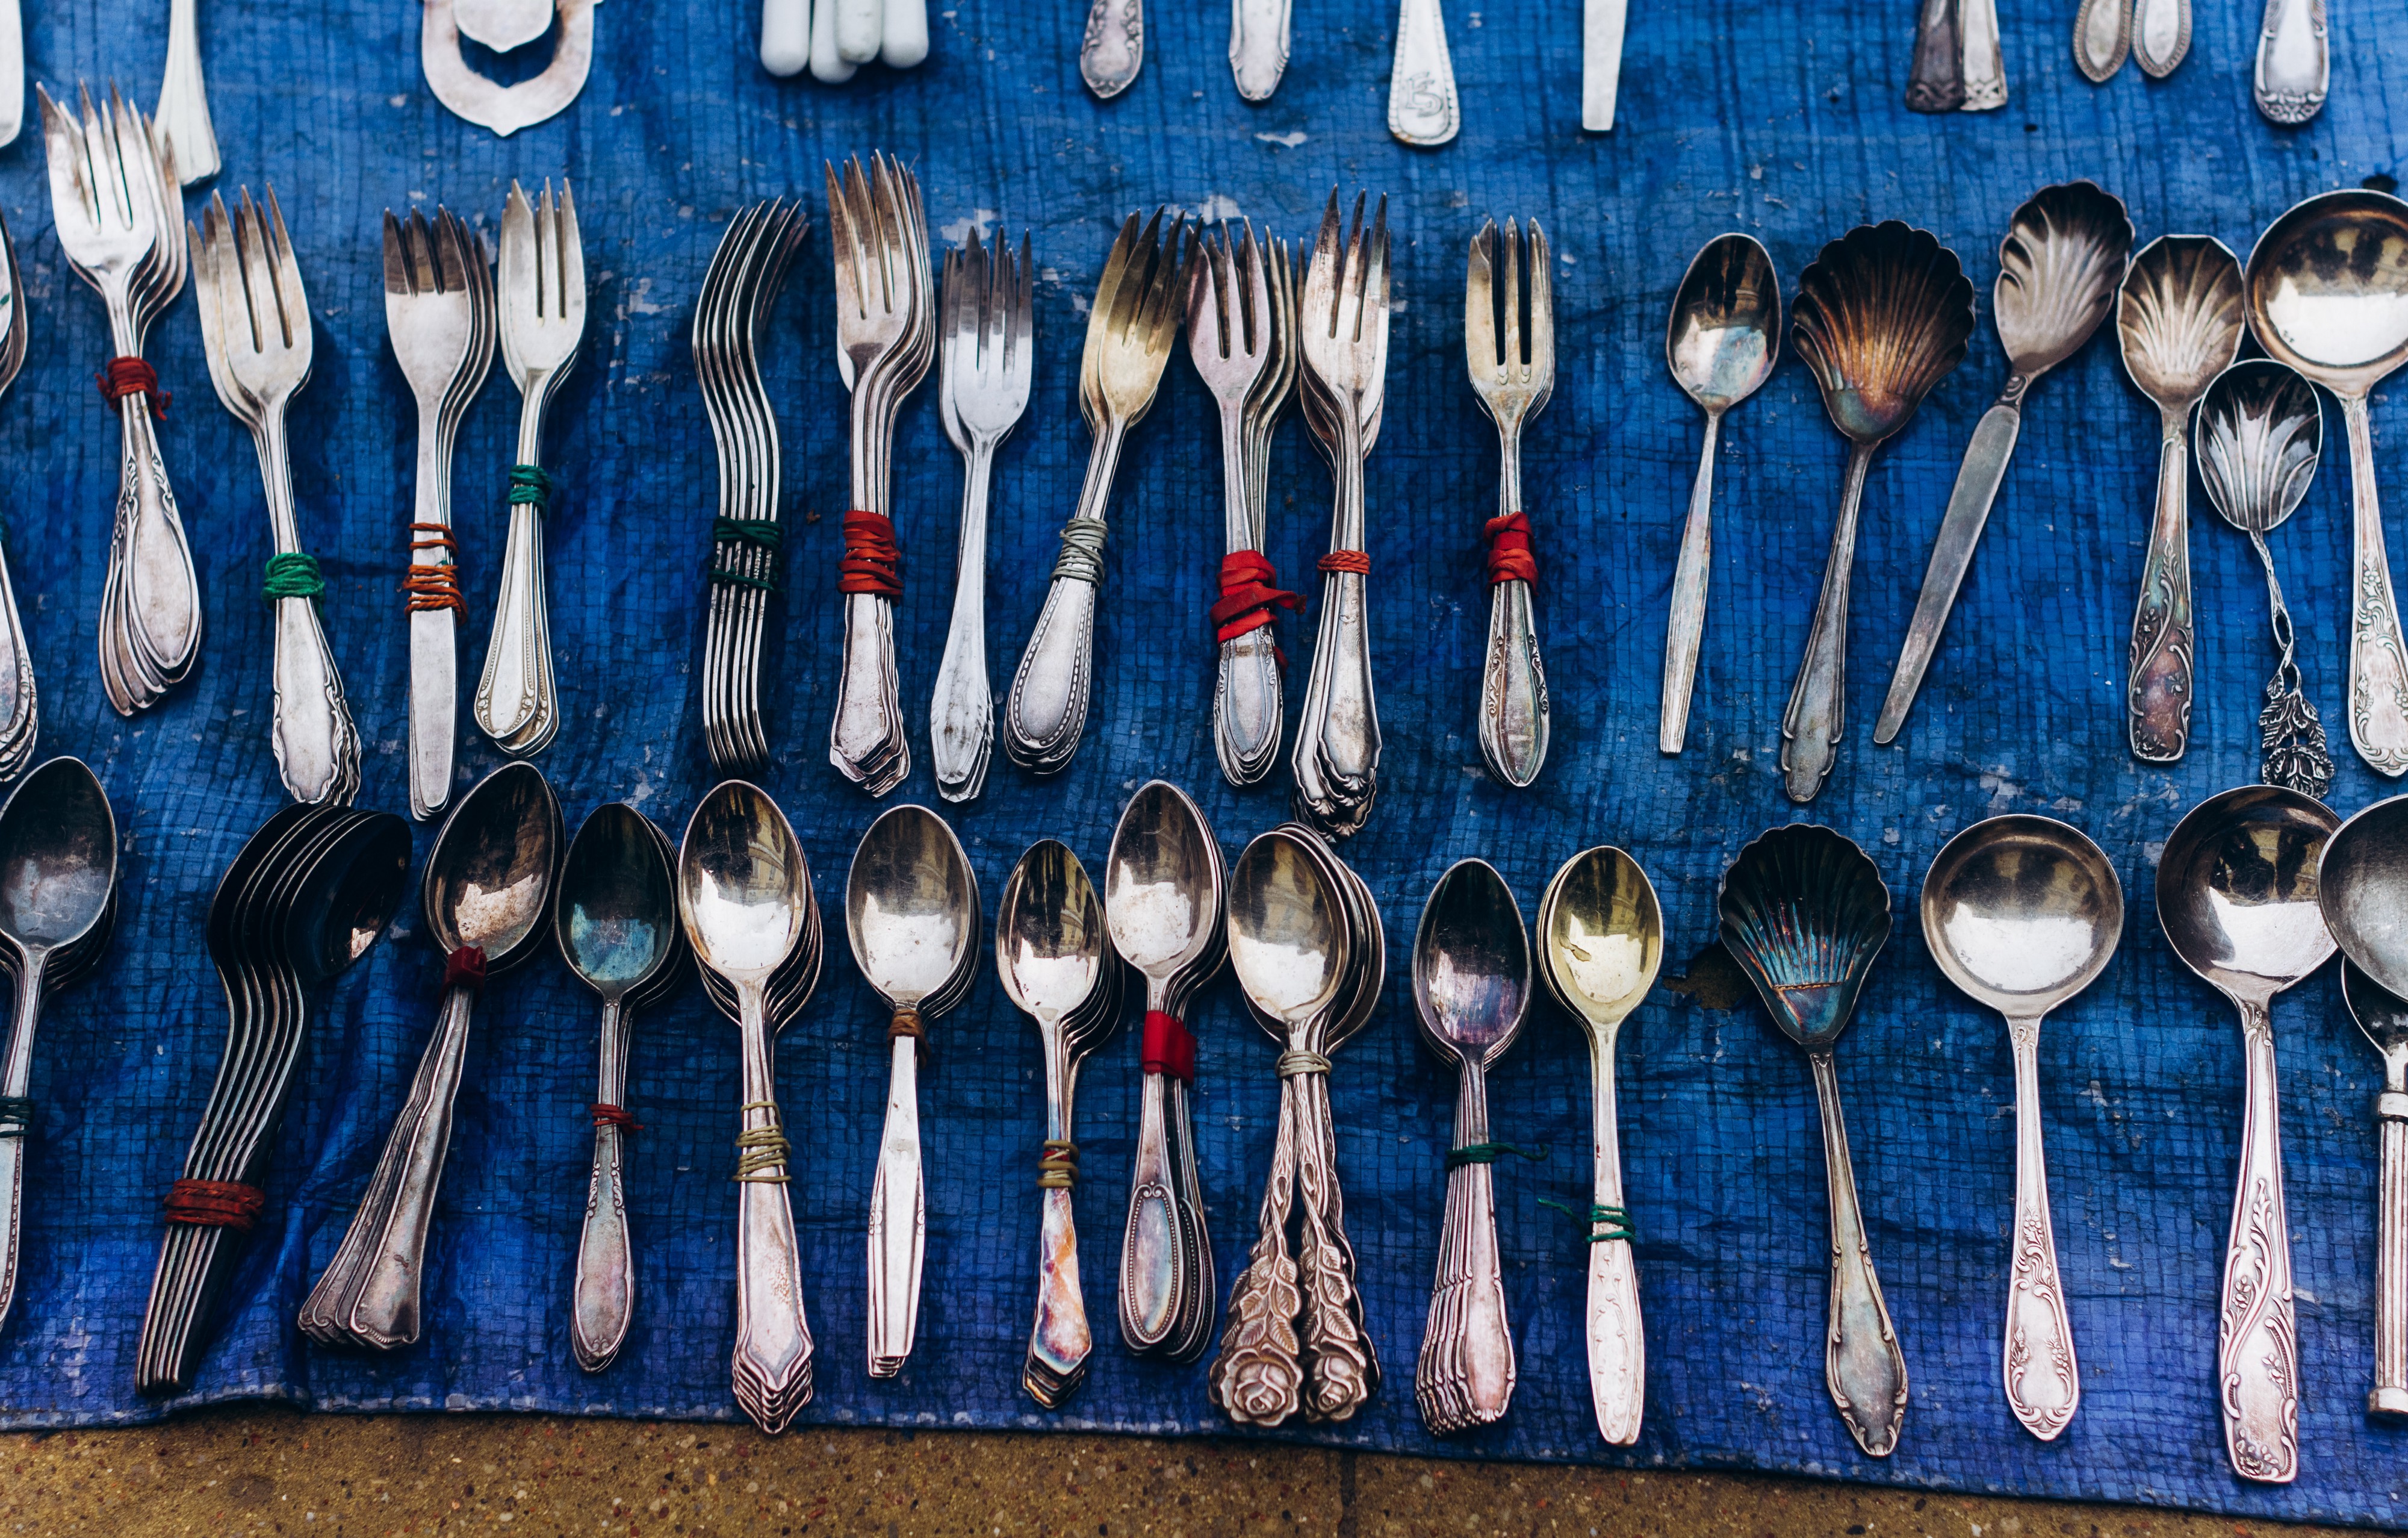 Grouped rows of forks and spoons, with identical items stacked and held together with rubber bands